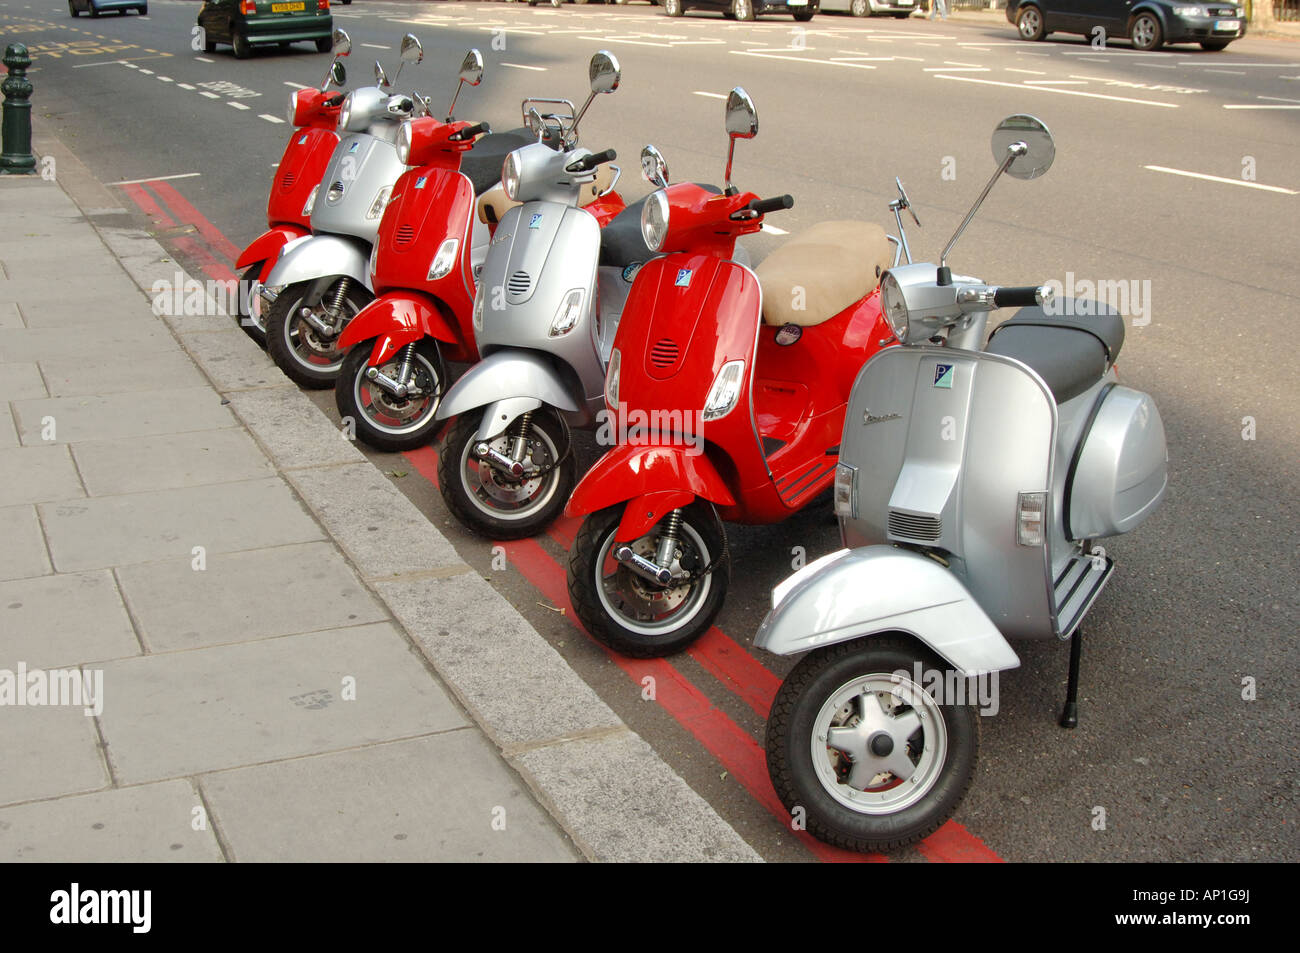 Vespa Museum High Resolution Stock Photography and Images - Alamy